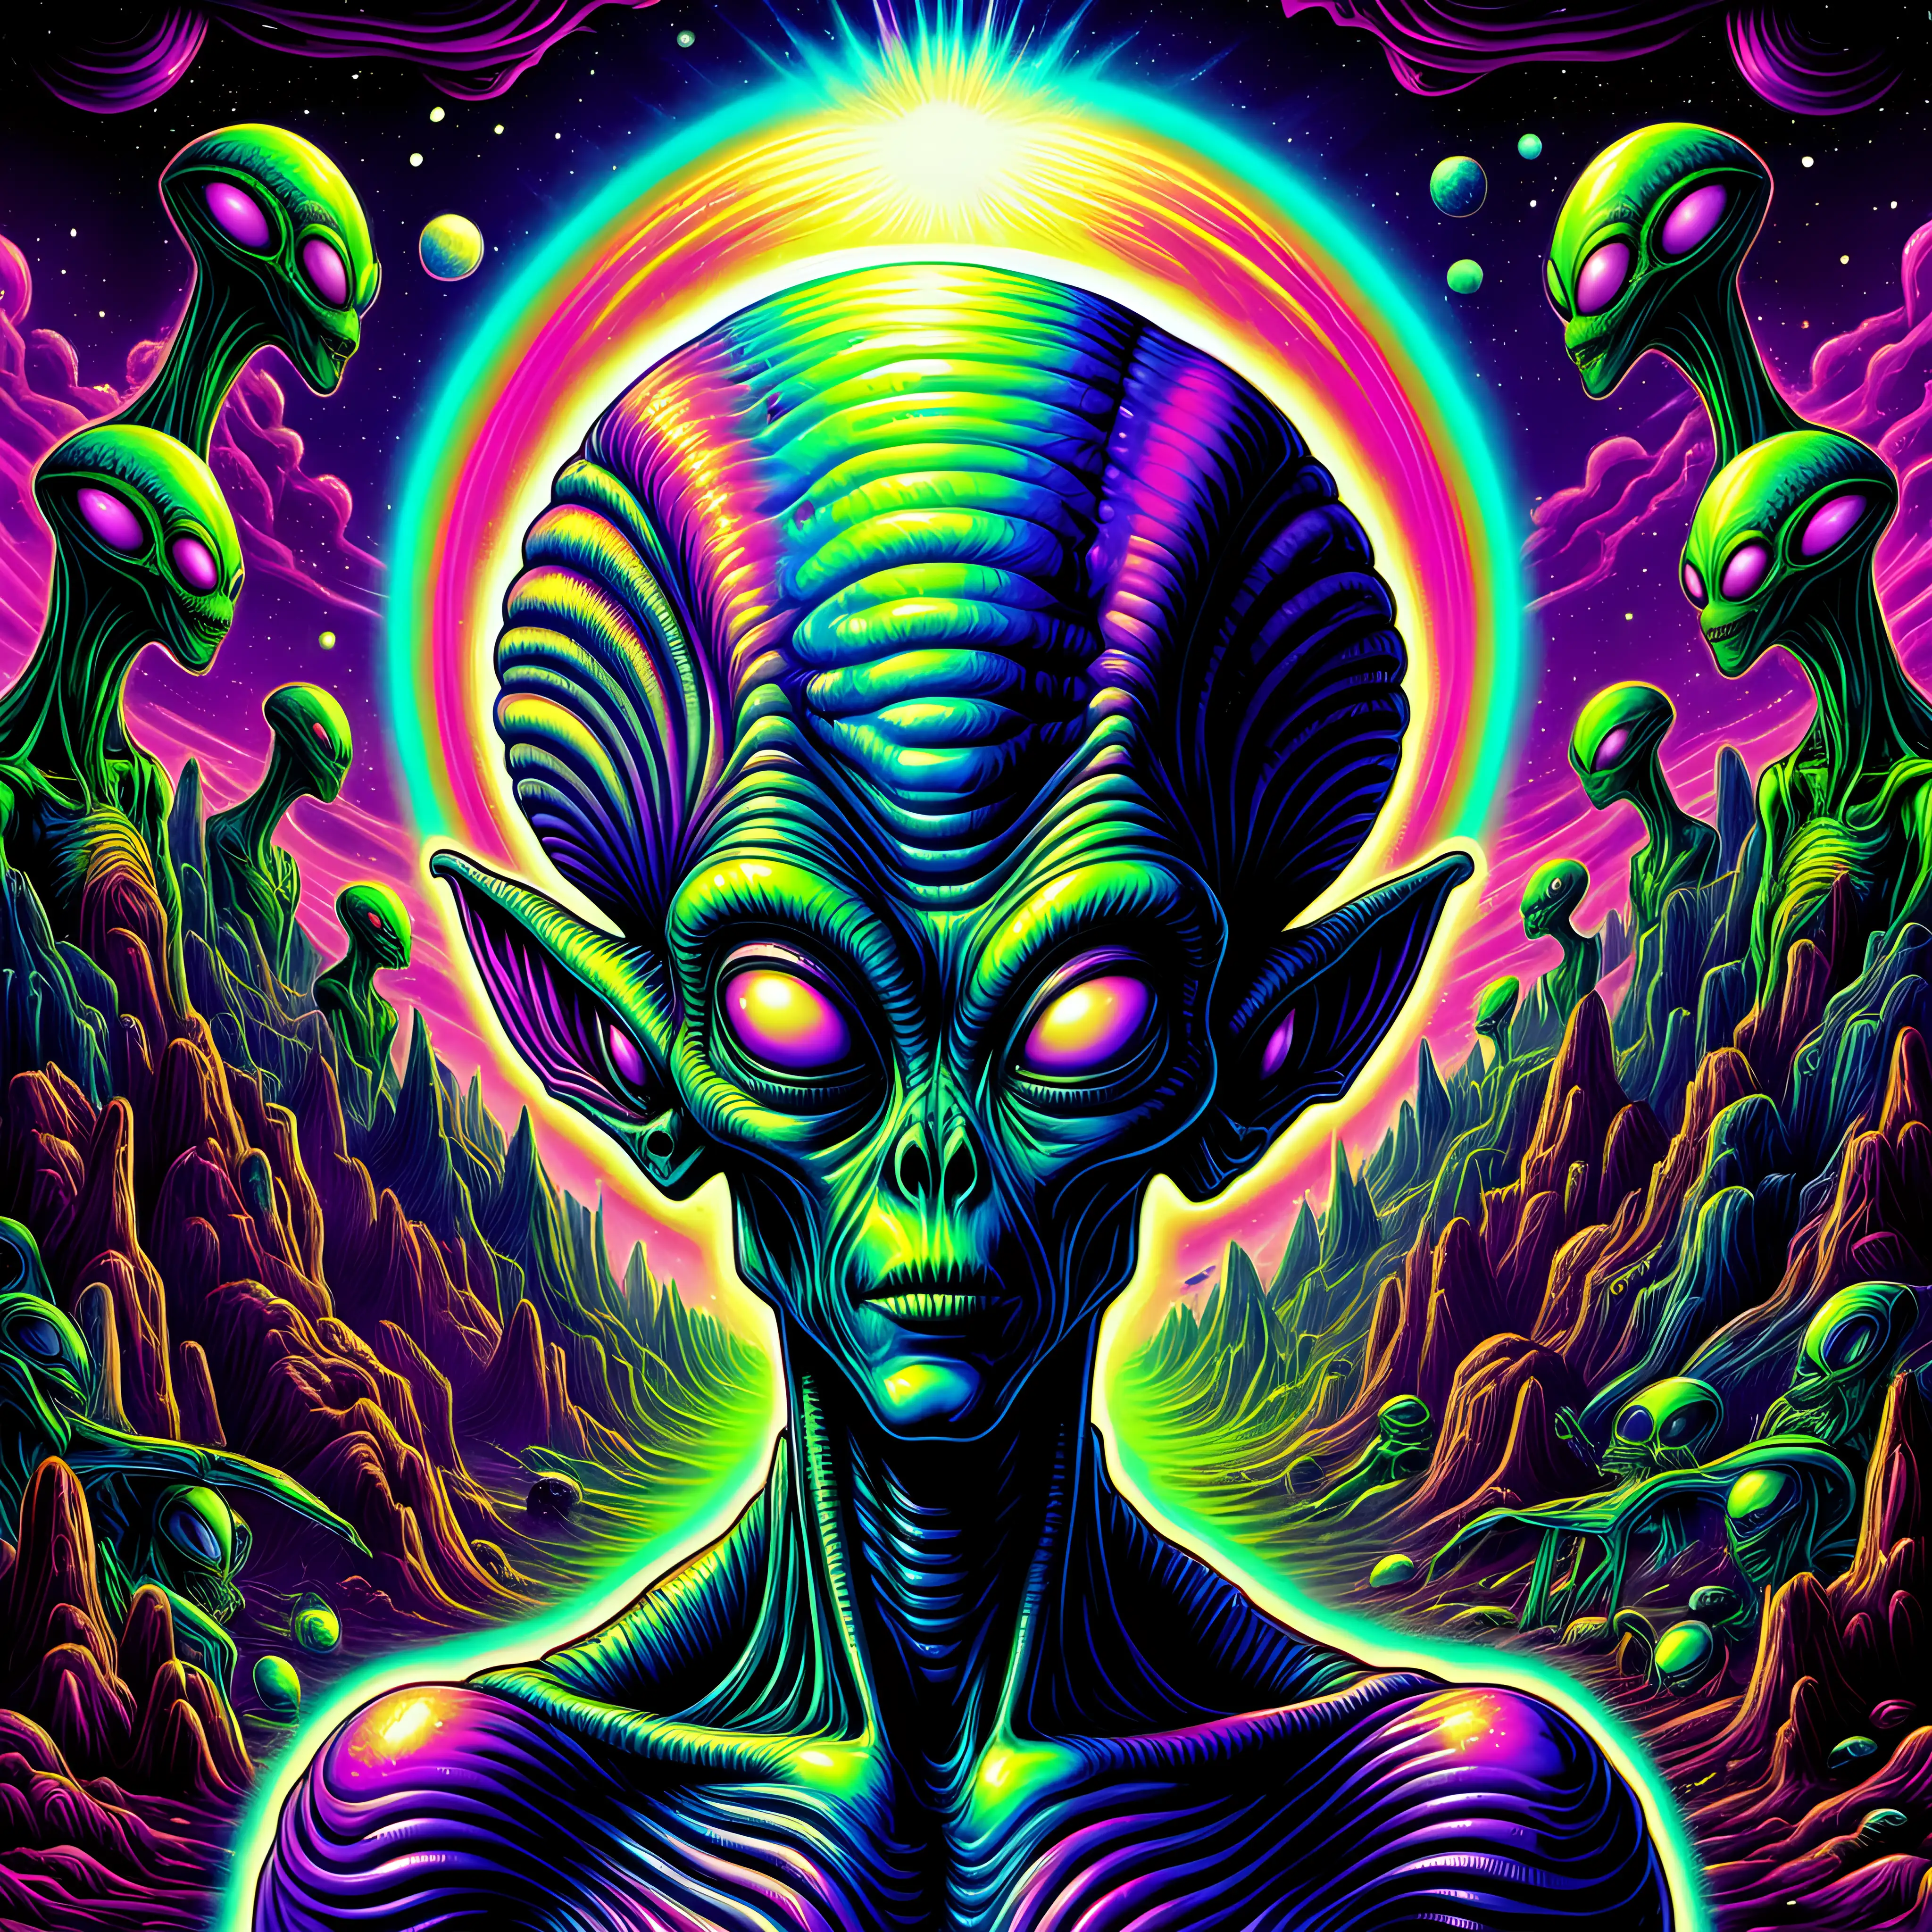 Psychedelic Alien Art Extraterrestrial Abstract Imagery